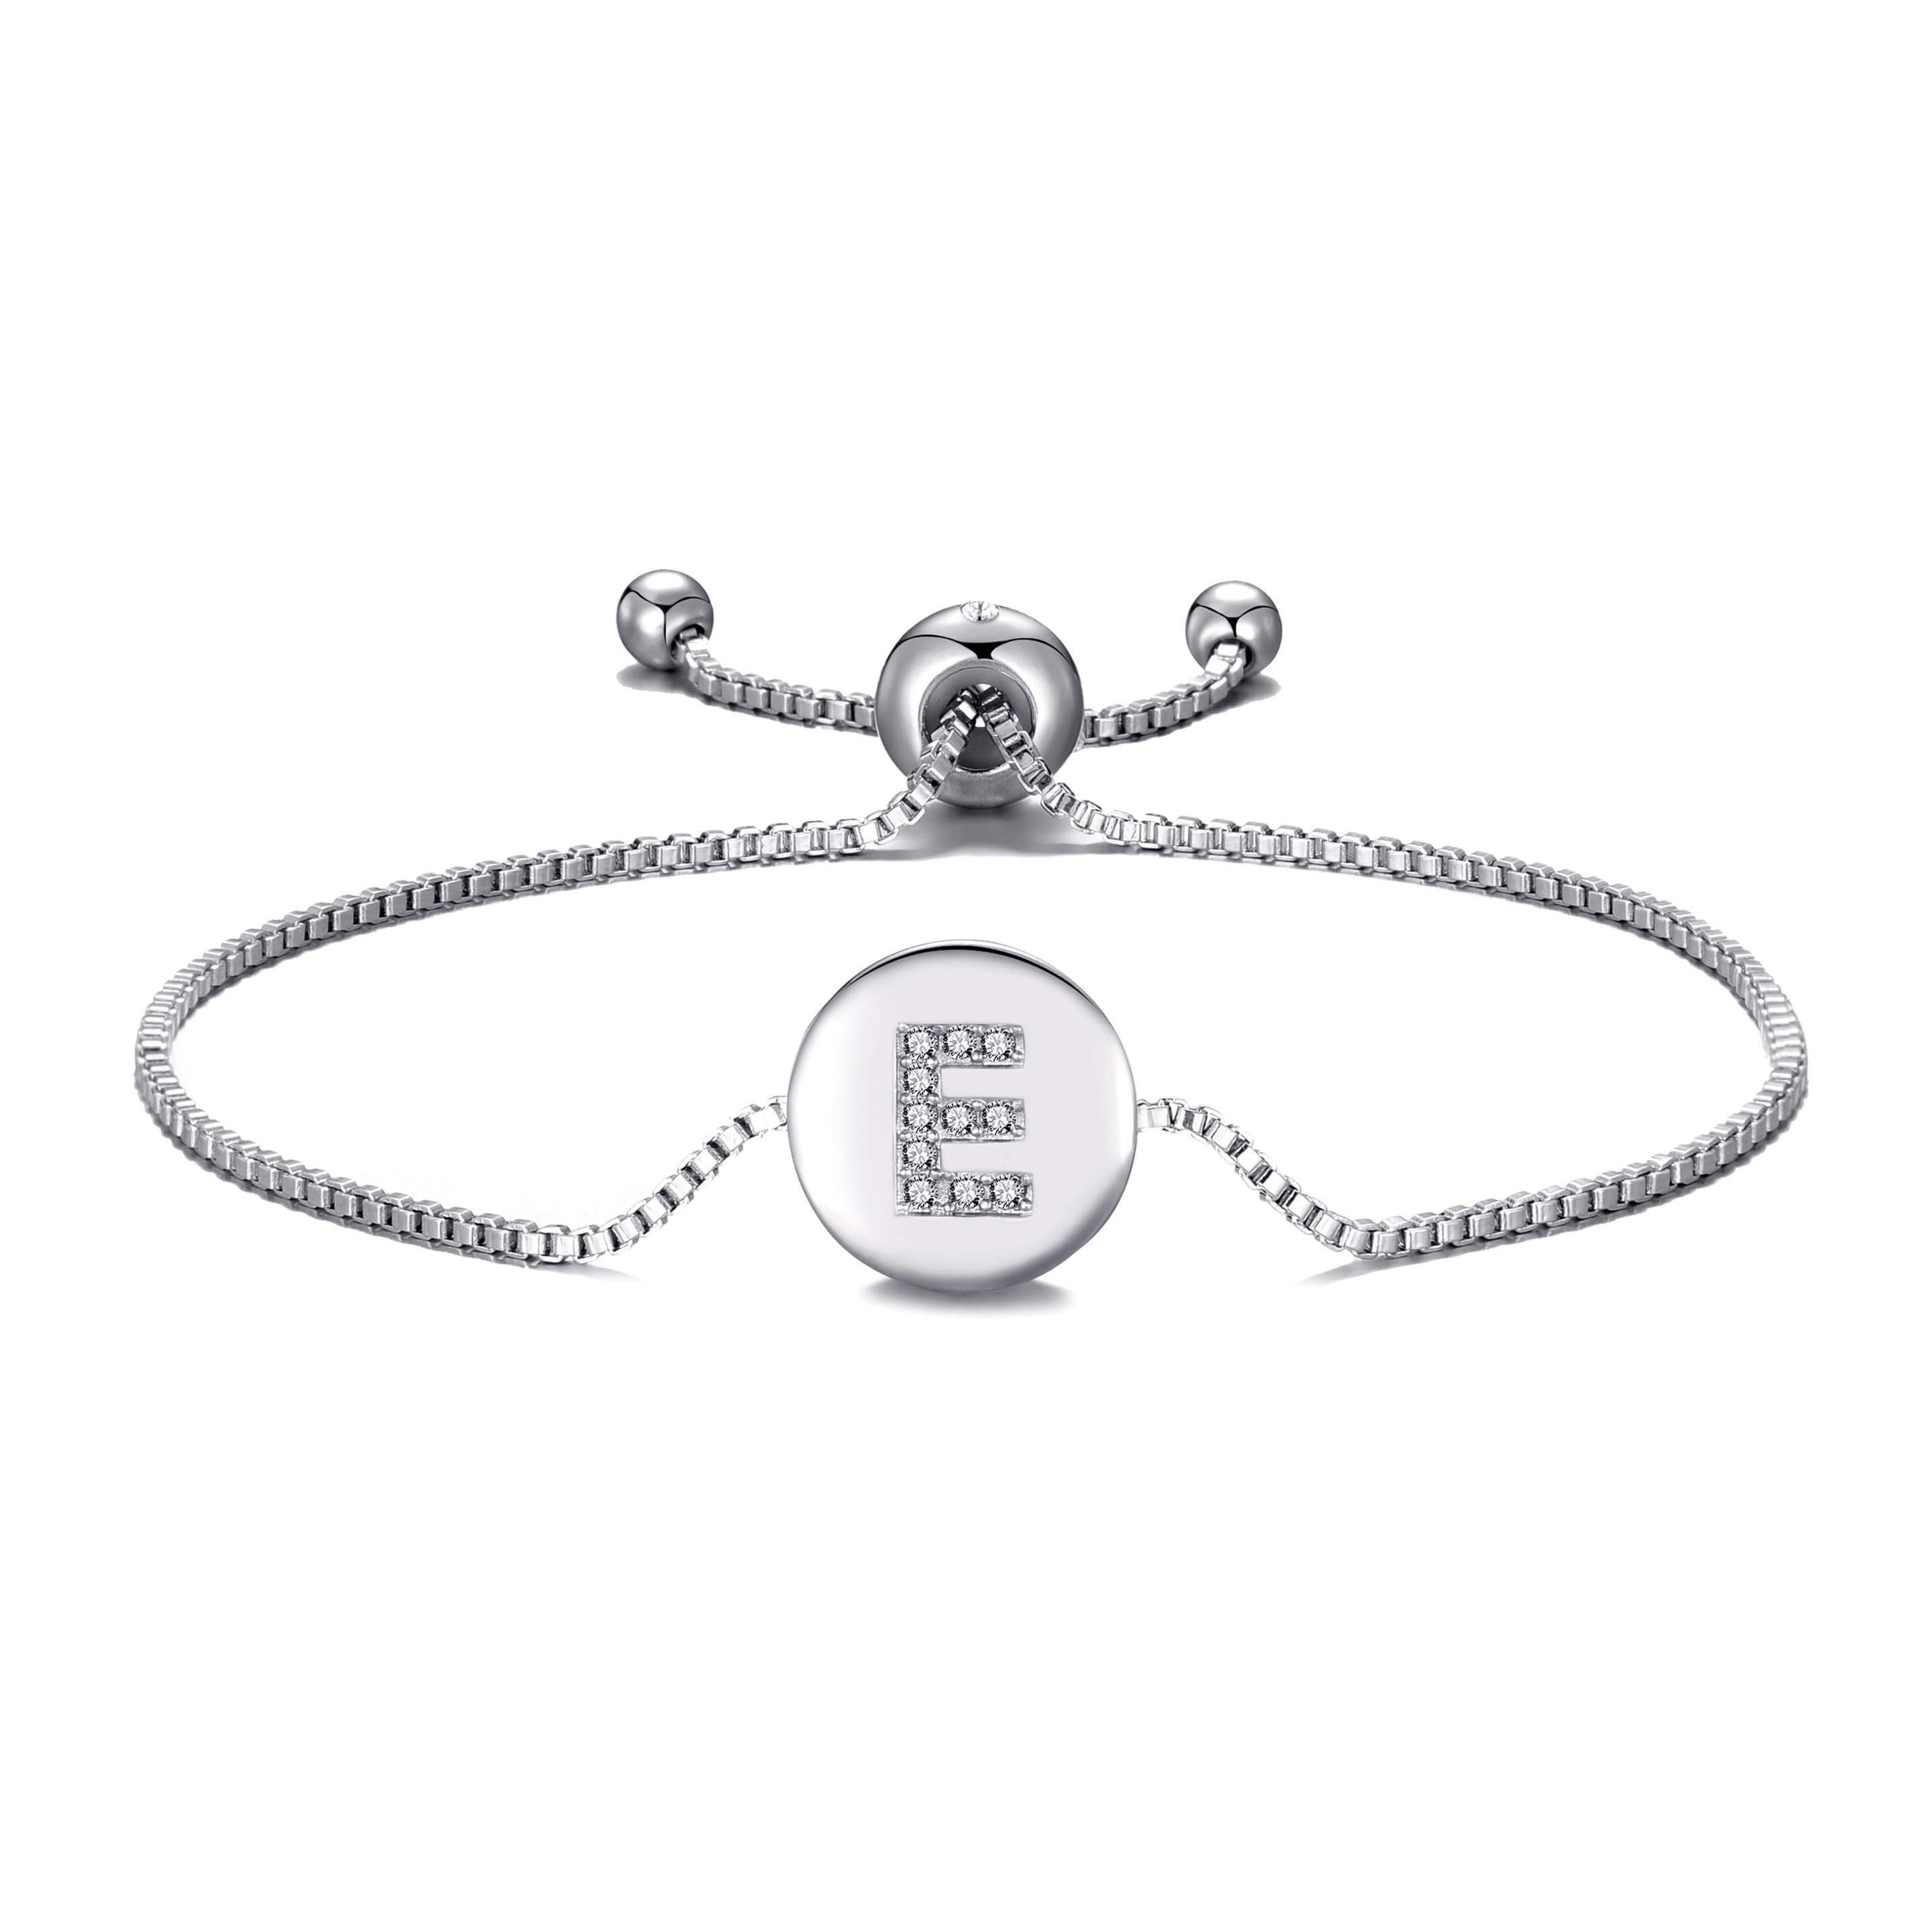 Initial Friendship Bracelet Letter E Created with Zircondia® Crystals